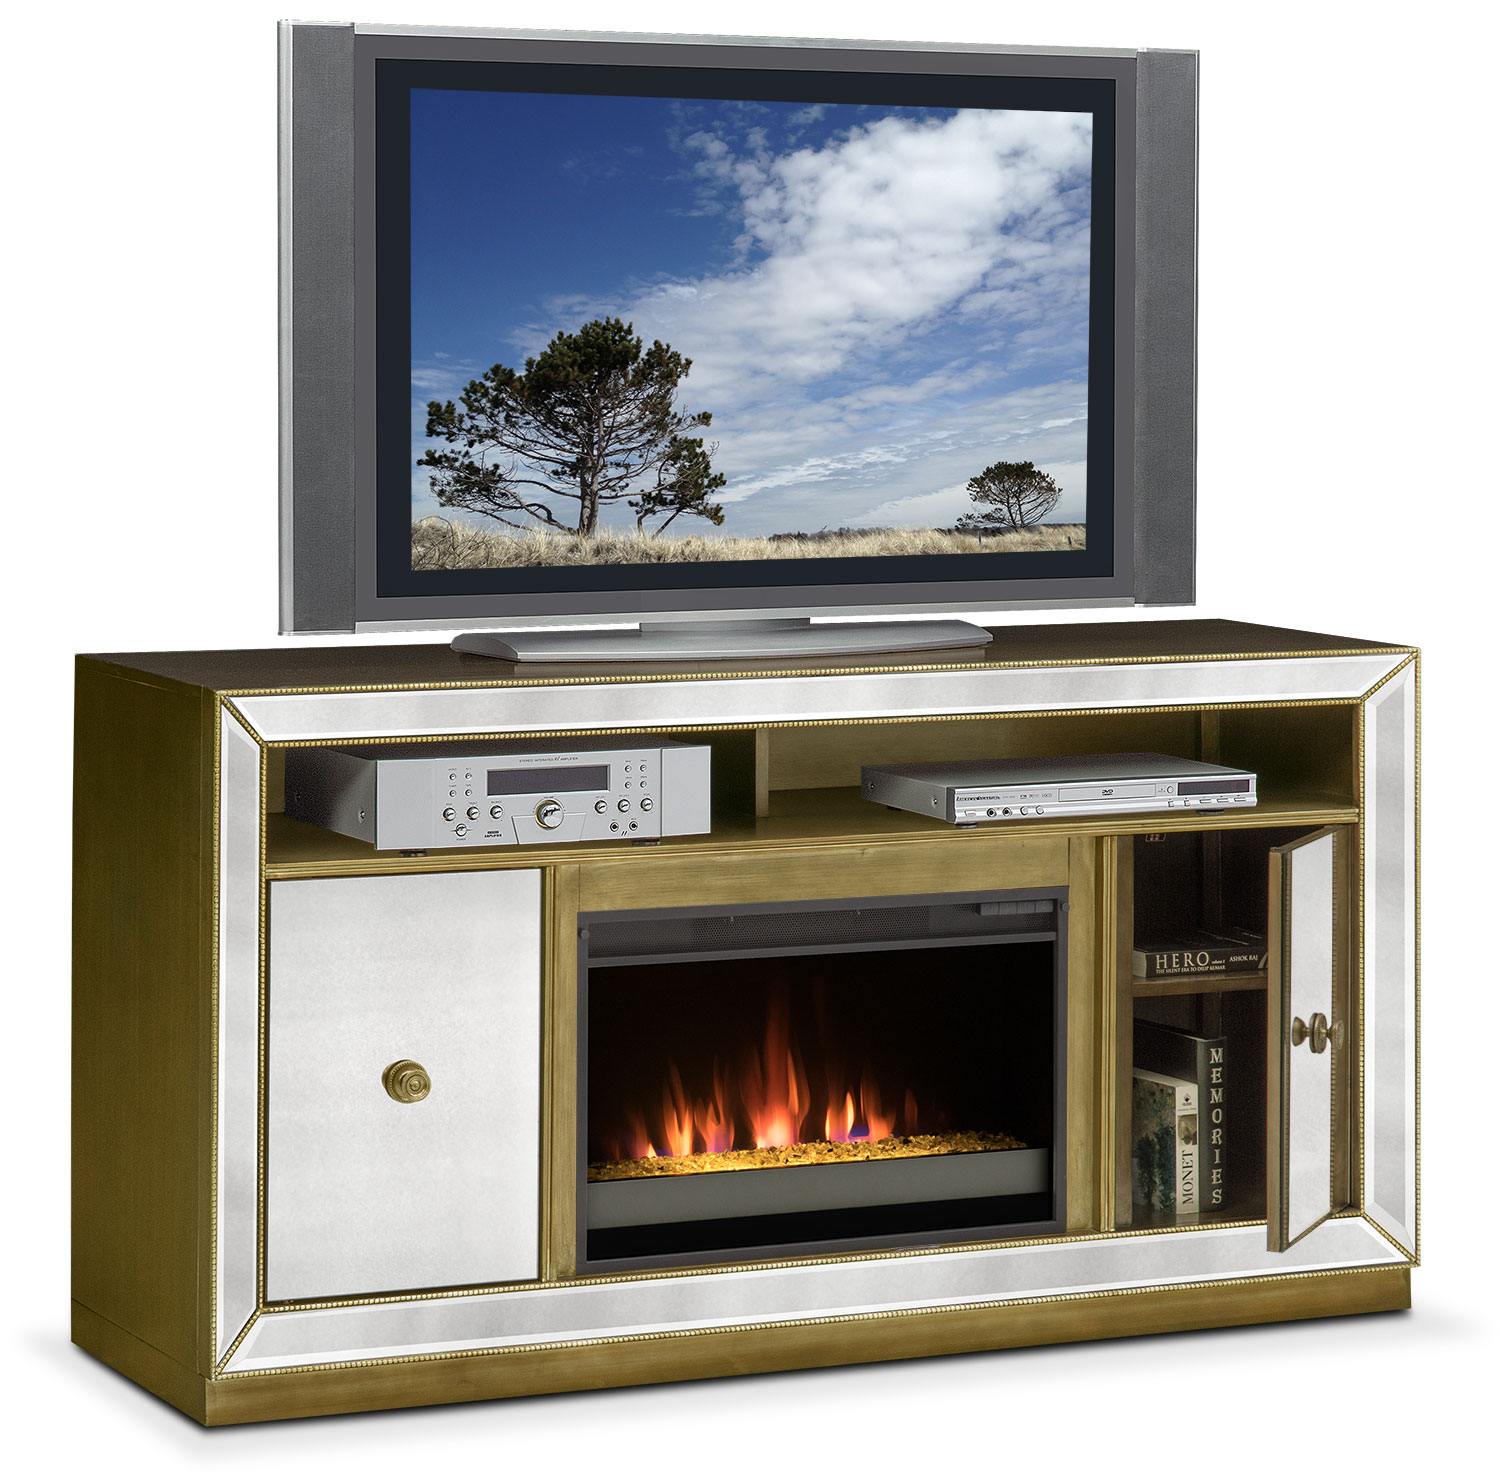 Mirrored Tv Stand with Fireplace Lovely Entertainment Centers Contemporary Corner Entertainment